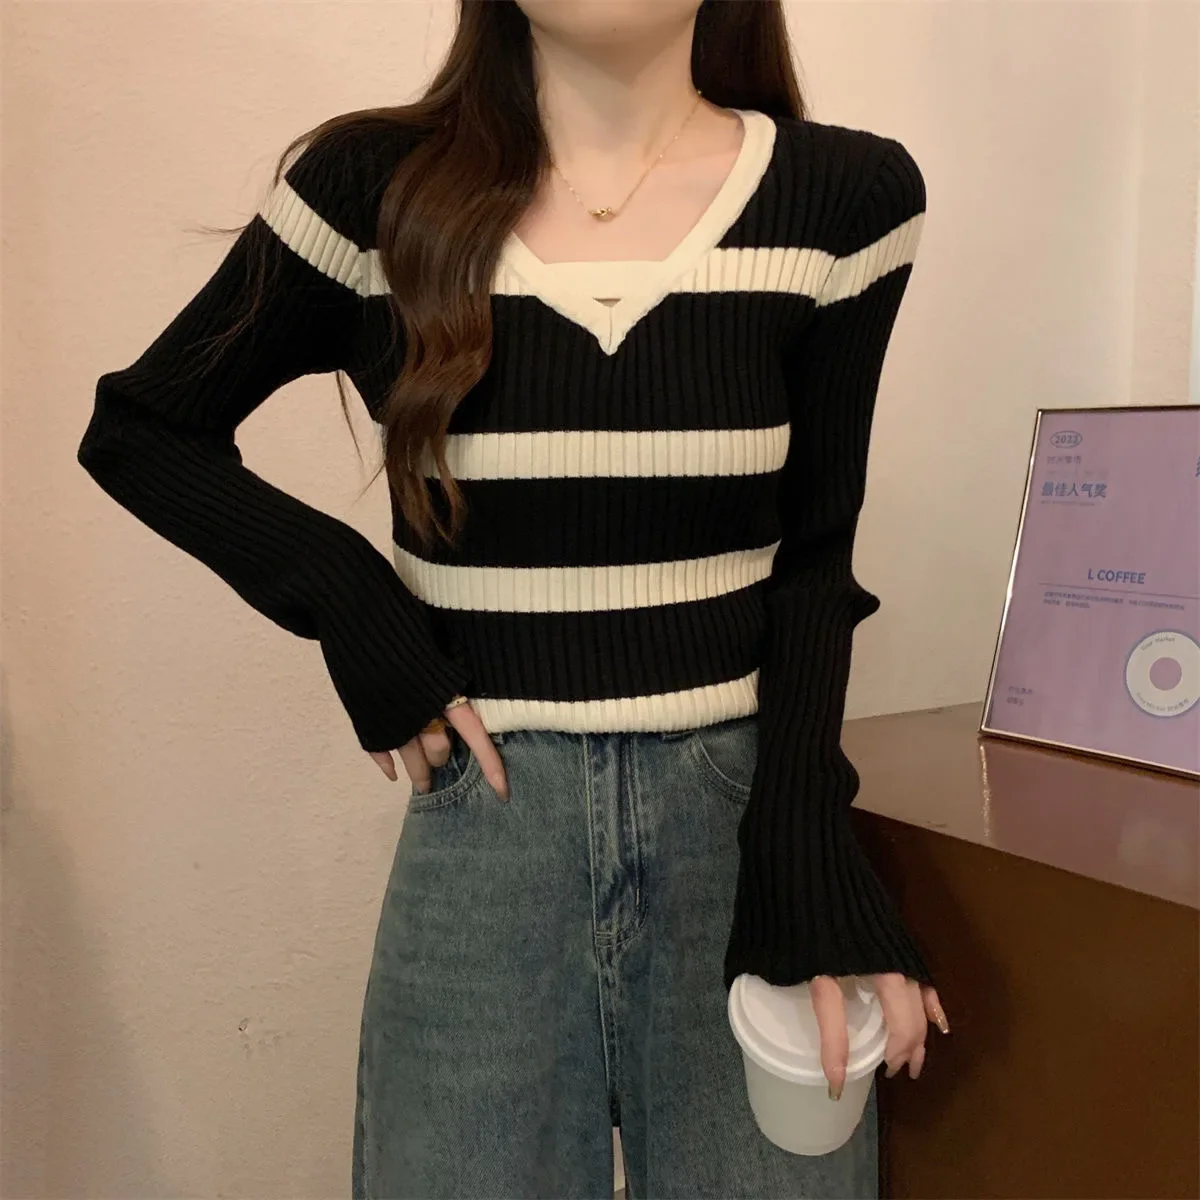 

spring Autumn Sweater Women's v-neck stripe Pullover apricot Knitwear Trending Sweaters Women's Trumpet Sleeve casual slim Tops